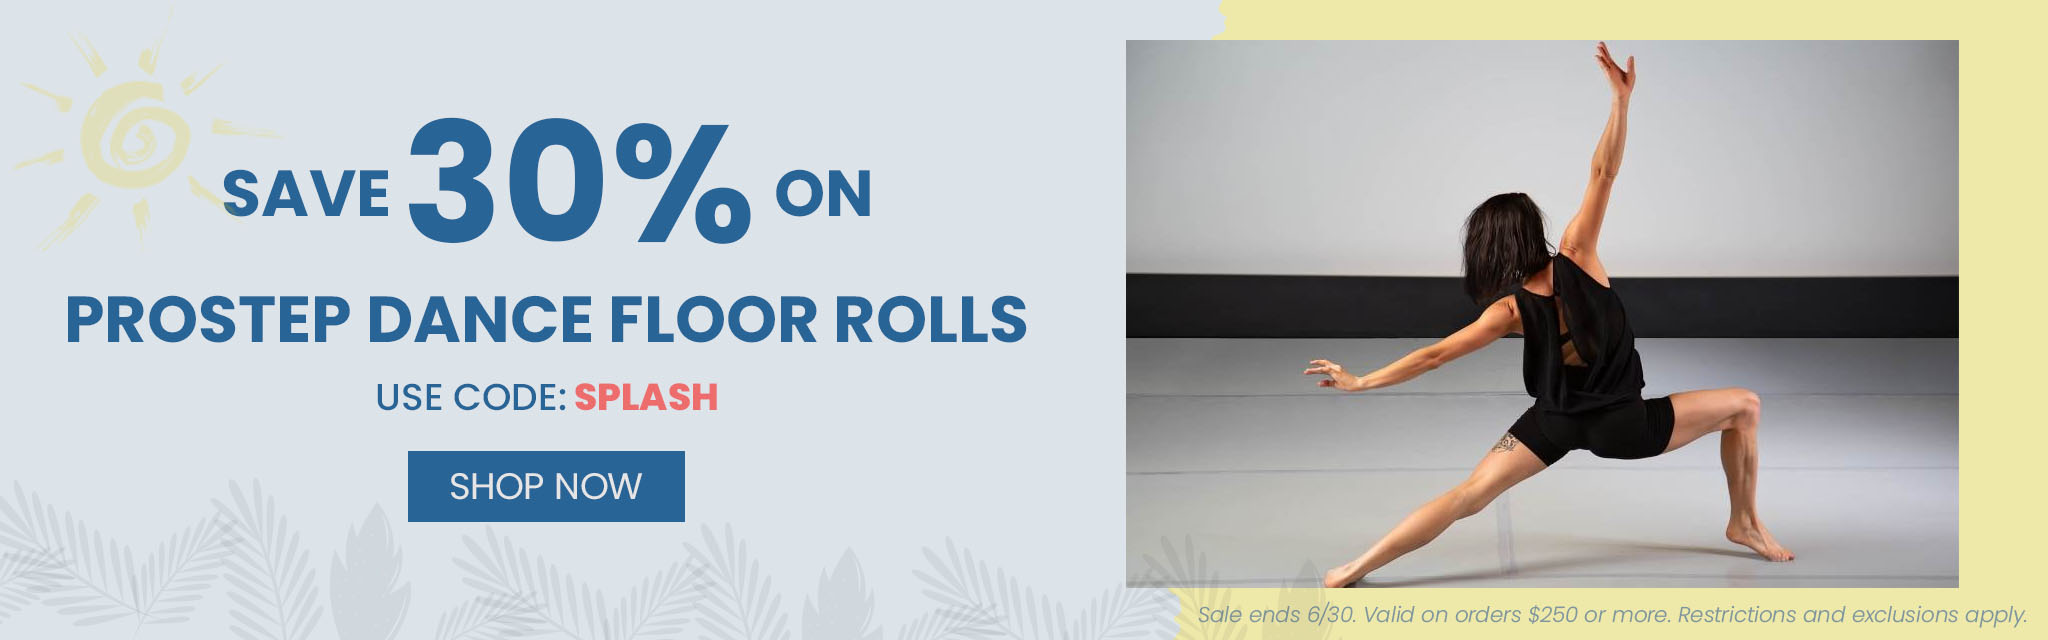 Save 30% On Prostep Dance Floor Rolls. Use Code: Splash Shop Now Sale ends 6/30. Valid on order $250 or more. Restrictions and exclusions apply.